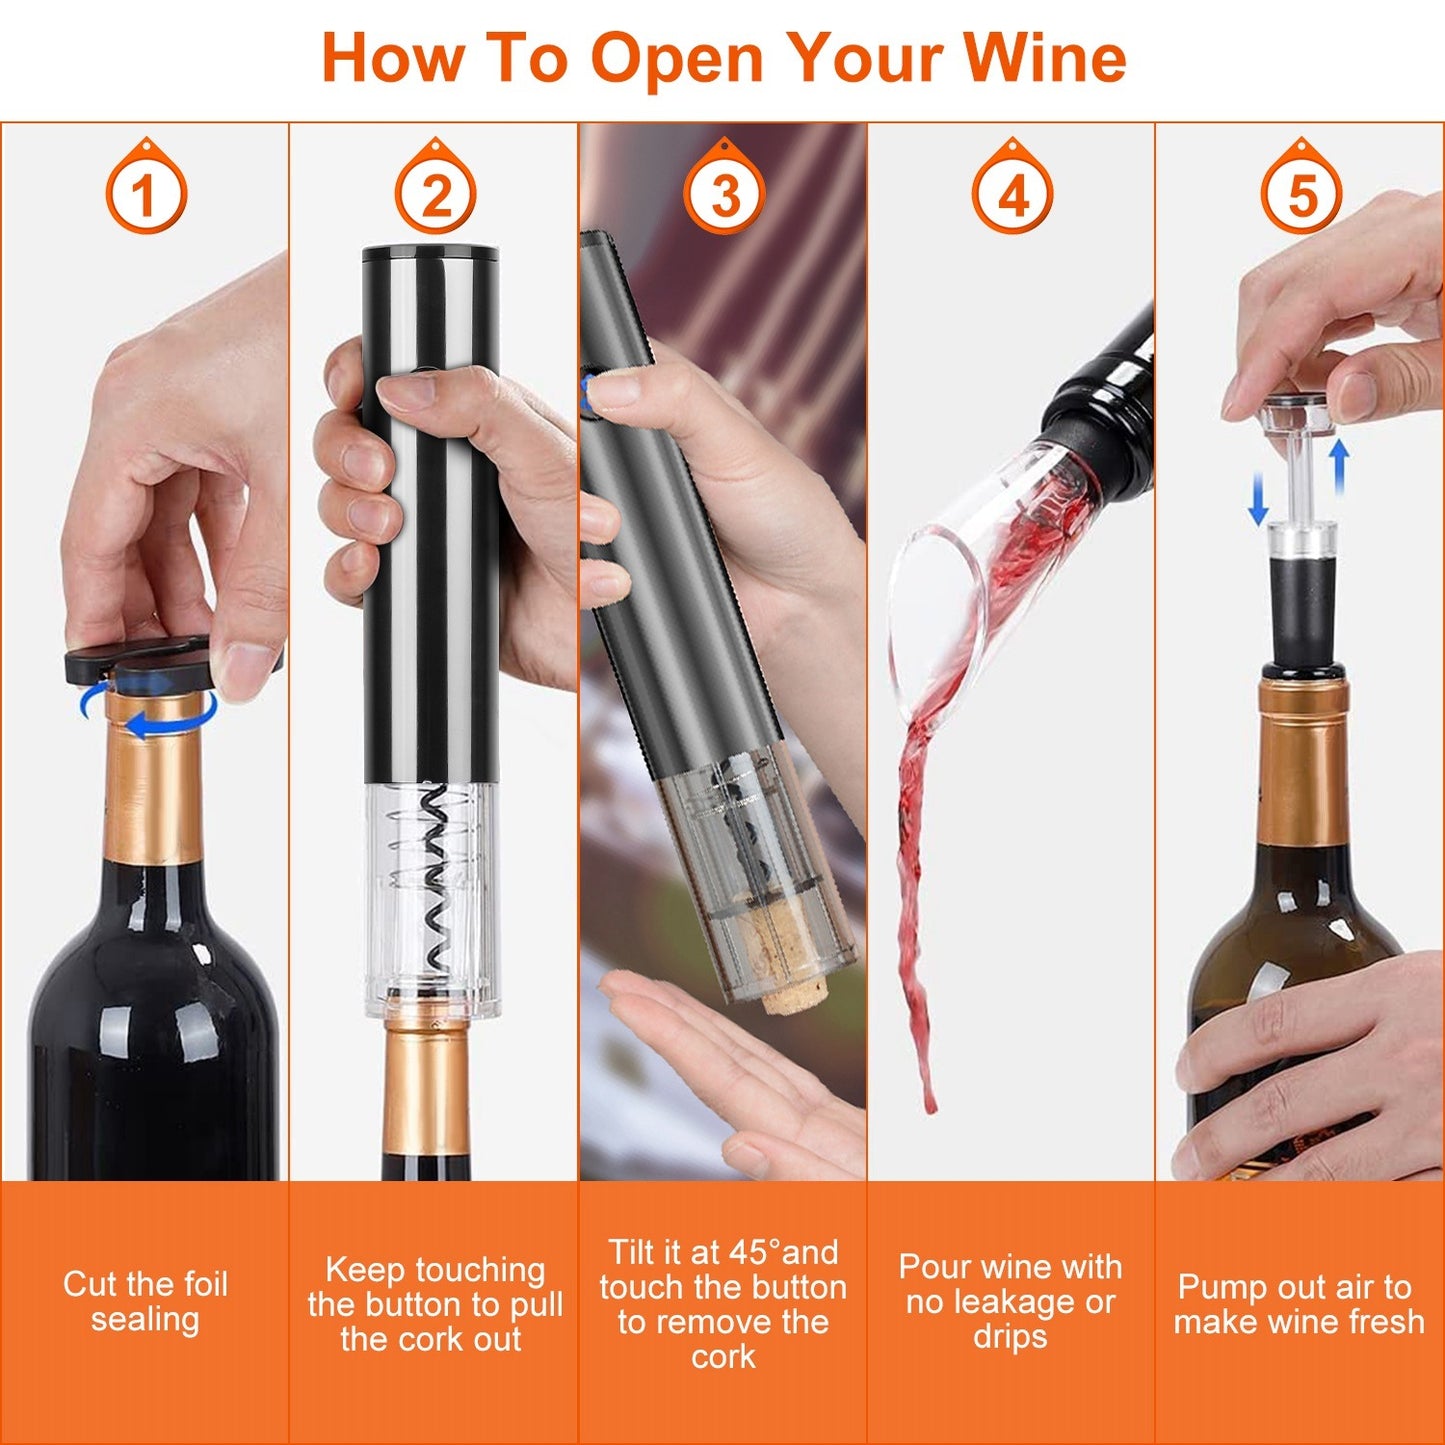 4 in 1 Electric Wine Opener Set Automatic Corkscrew Cordless Rechargeable Wine Opener